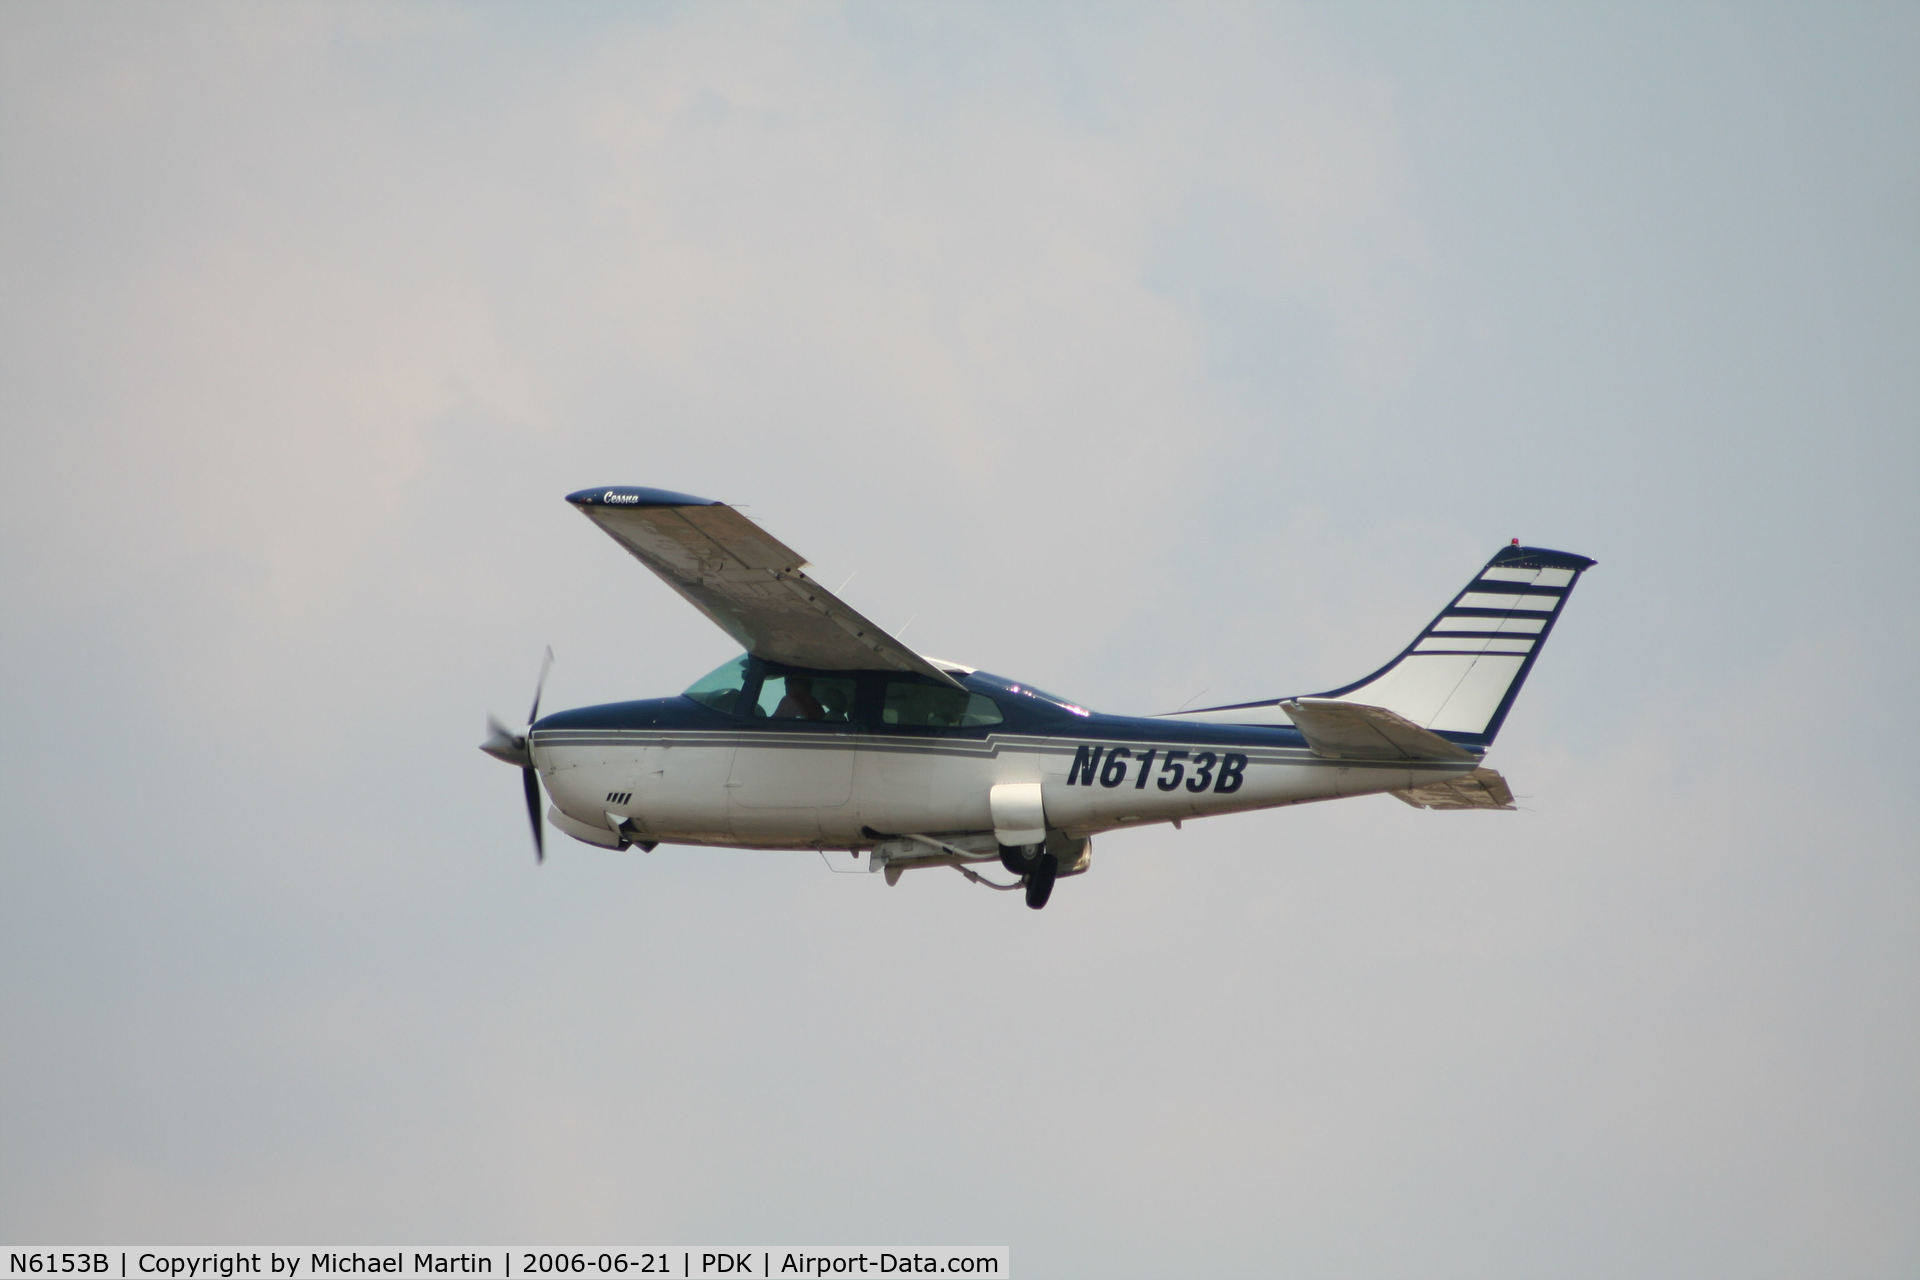 N6153B, 1978 Cessna T210M Turbo Centurion C/N 21062696, Gear up after take off from 2L